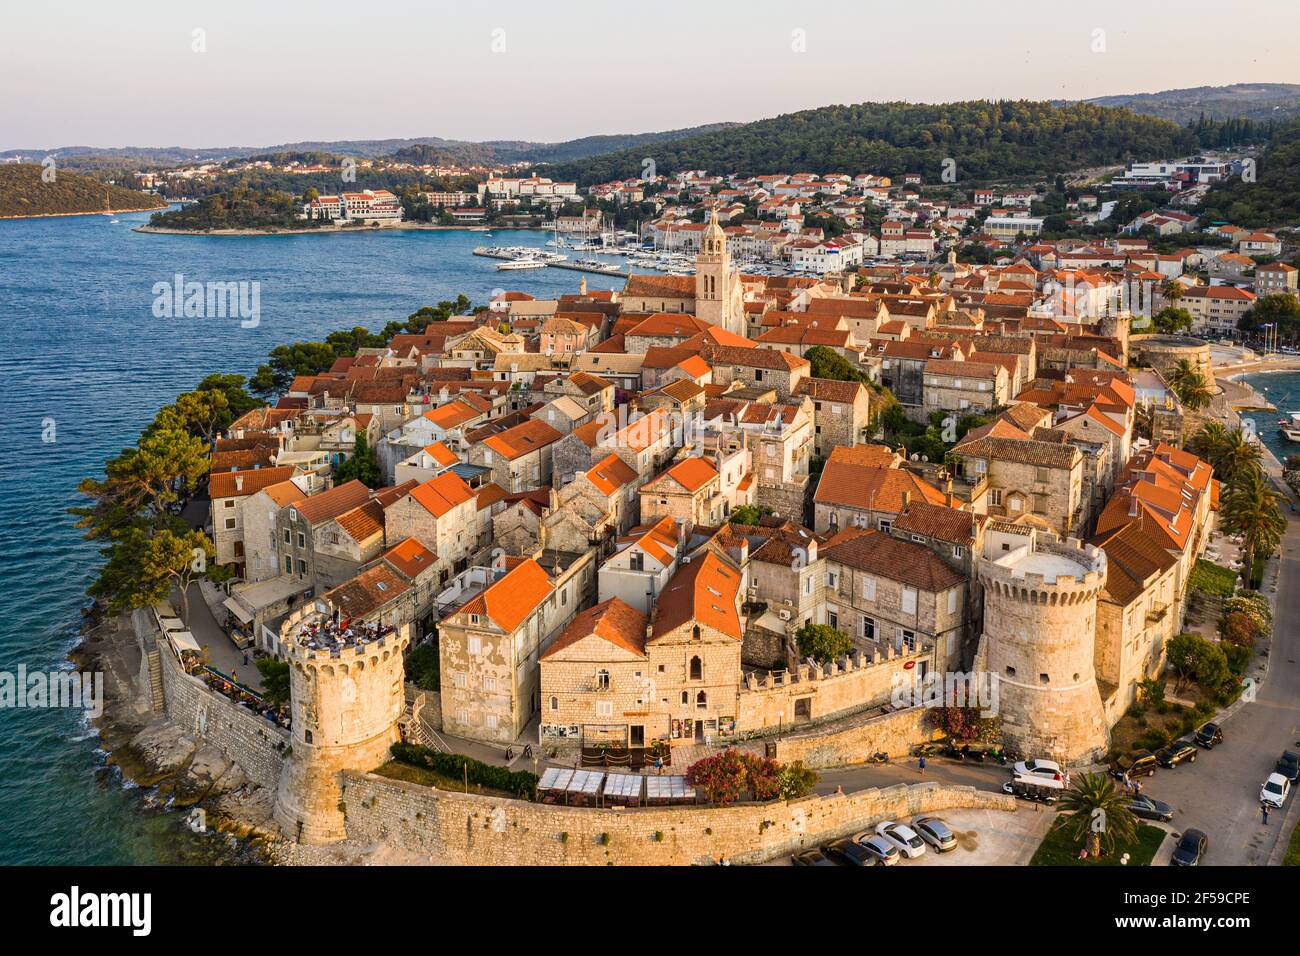 Dramatic aerial view of the famous Korcula old town by the Adriatic sea in Croatia Stock Photo